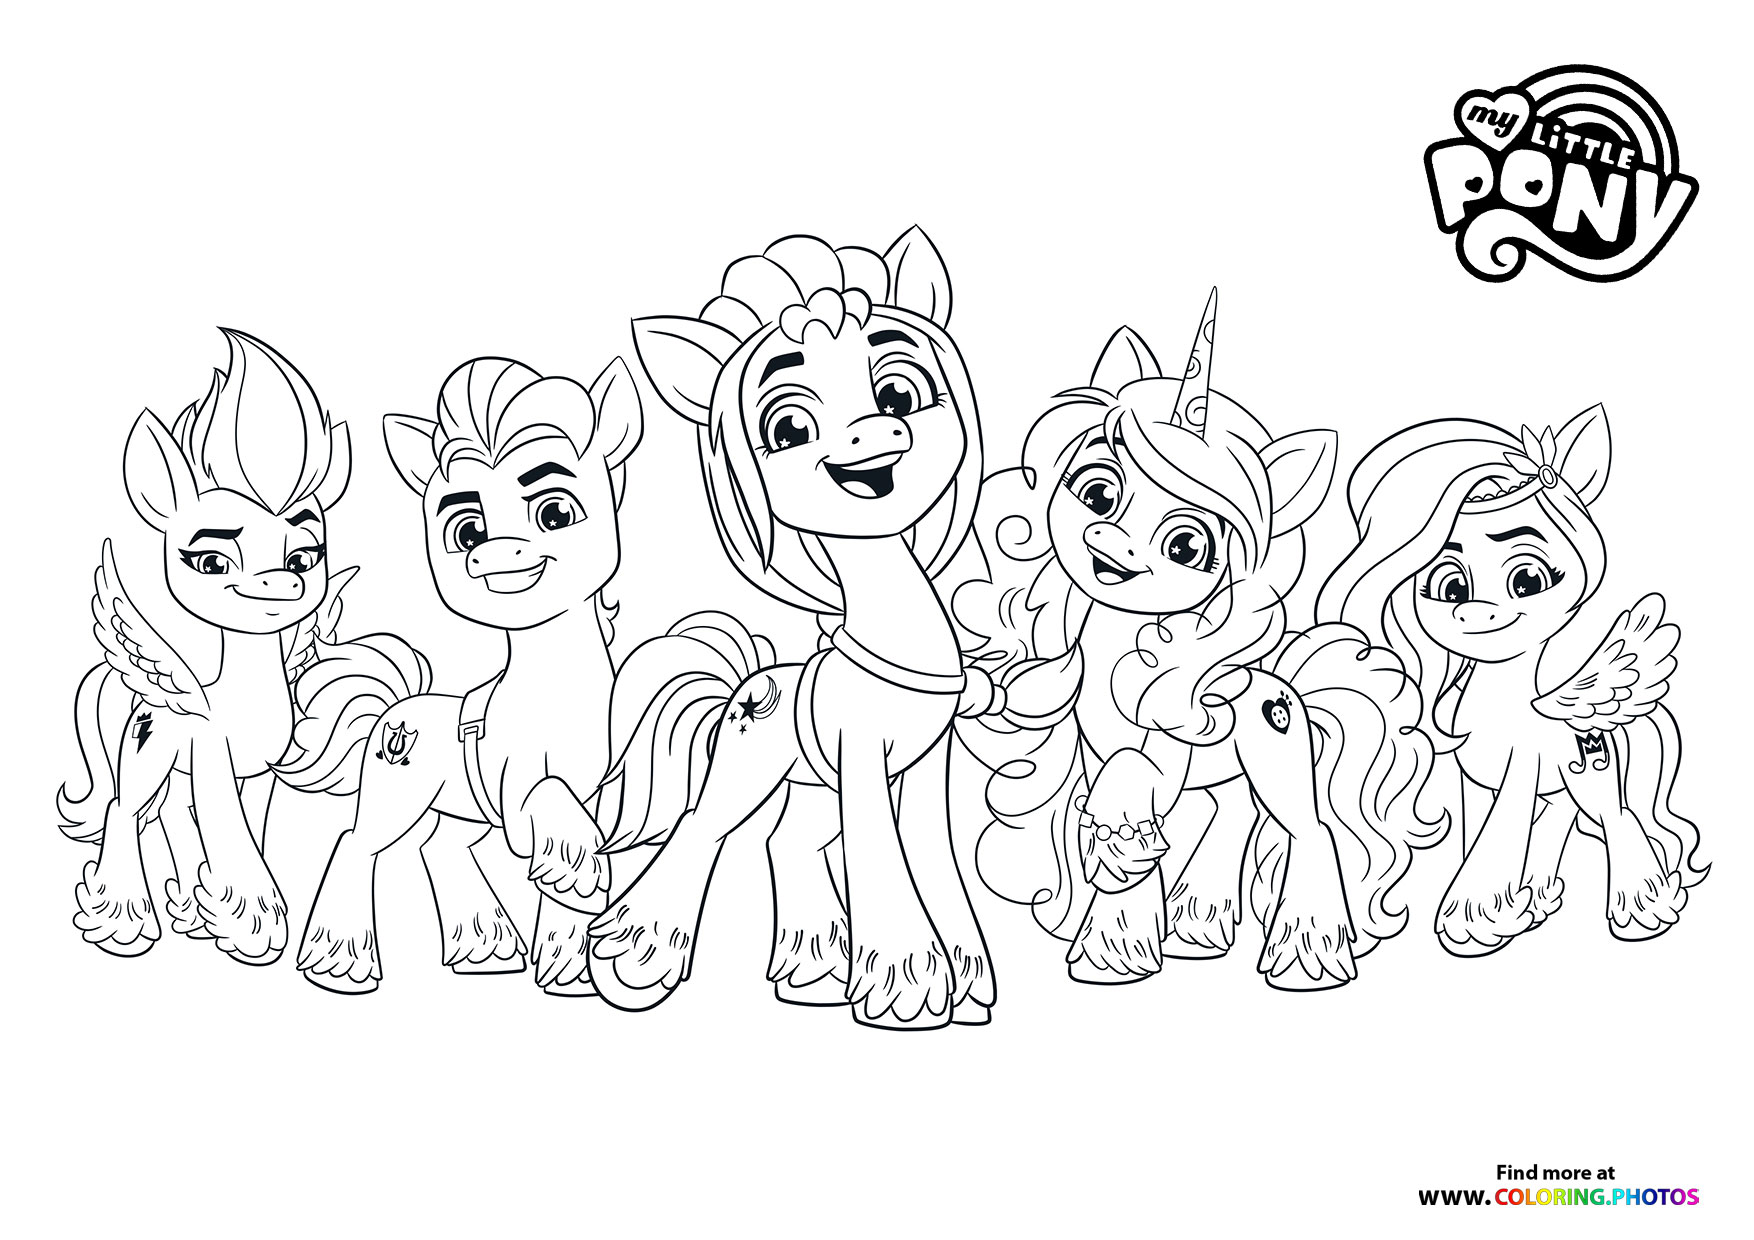 My Little Pony characters   A New Generation   Coloring Pages for kids